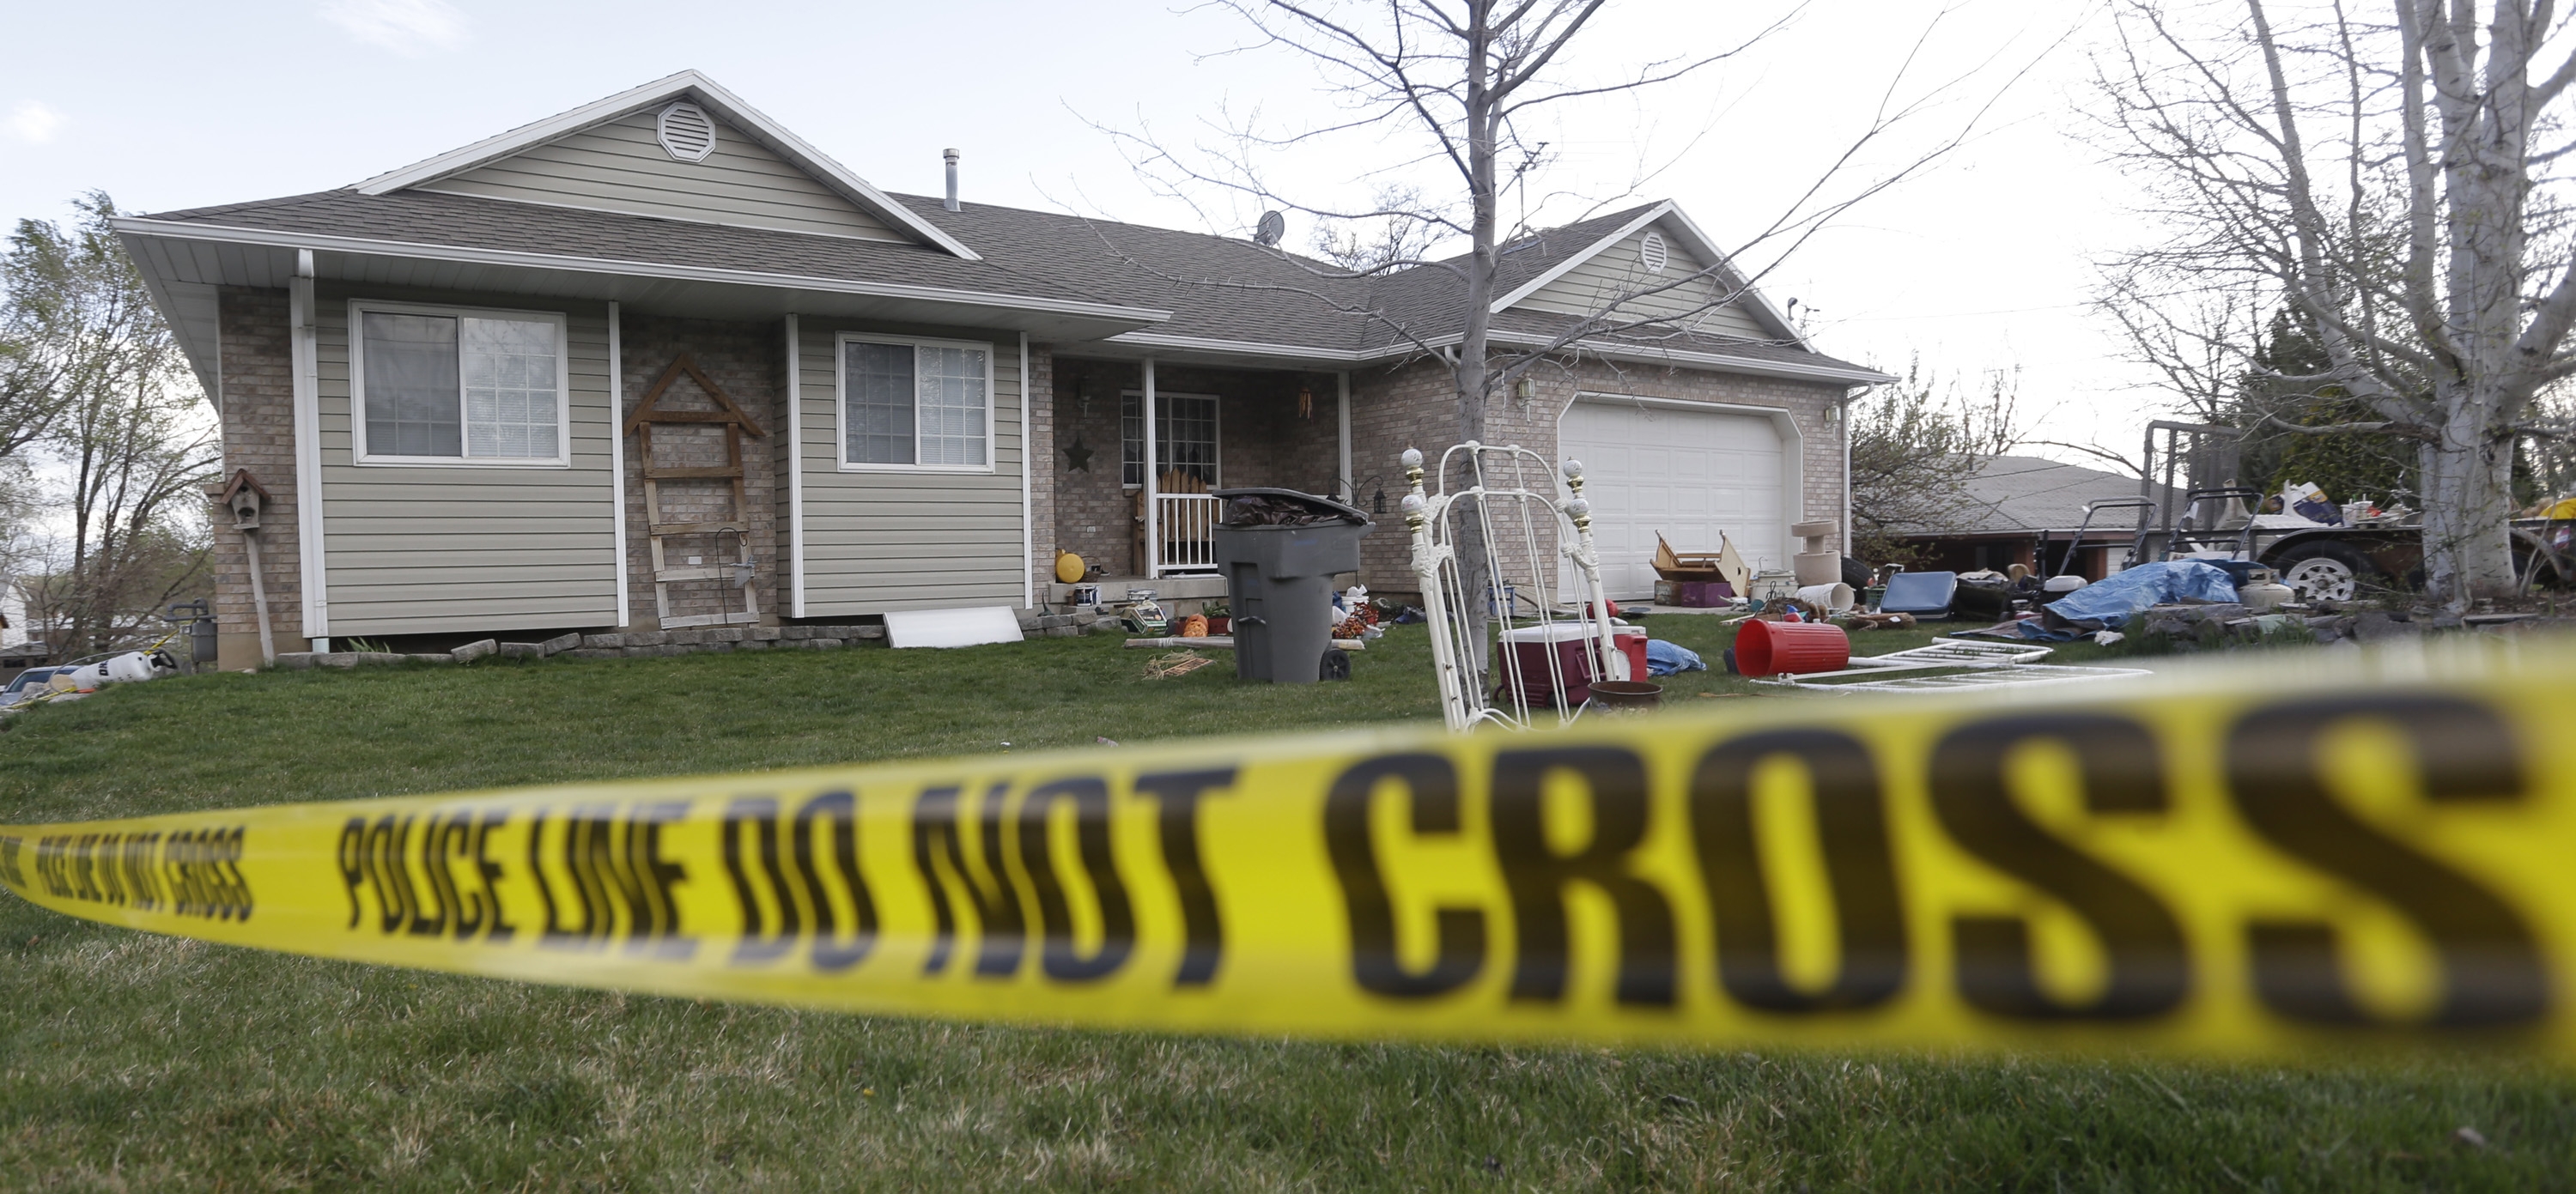 Police tape surrounds the Utah home of Megan Huntsman, who admitted to killing six of her infant children and hiding their bodies (Rick Bowmer&mdash;AP)